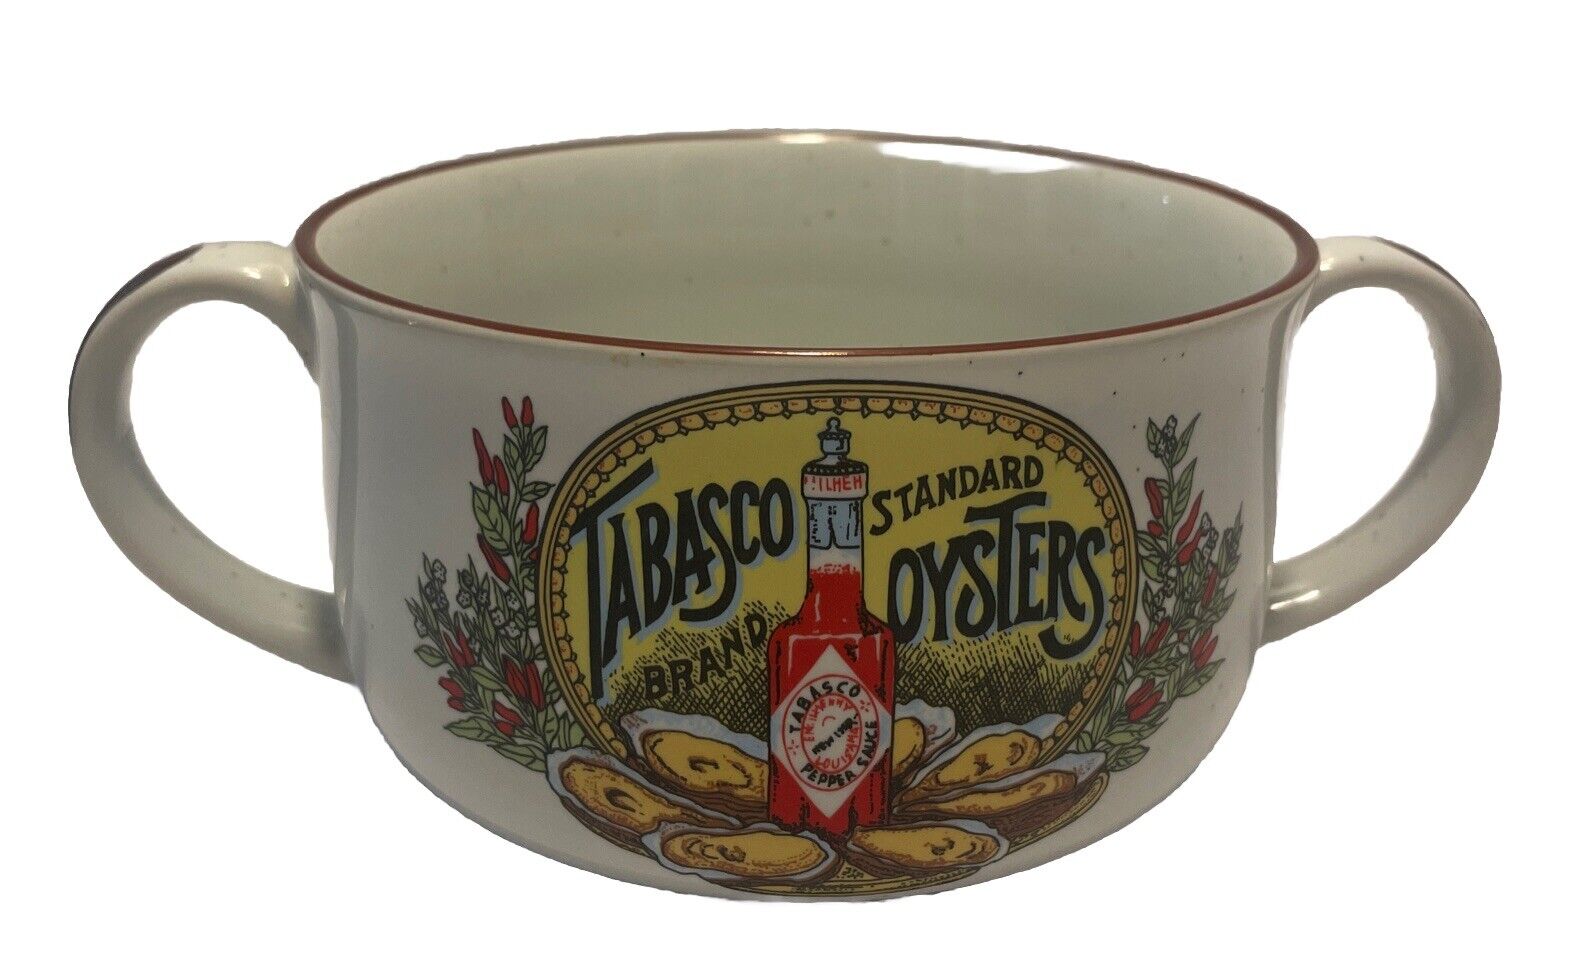 Tabasco Brand Standard Oysters Double Handle Bowl. EUC